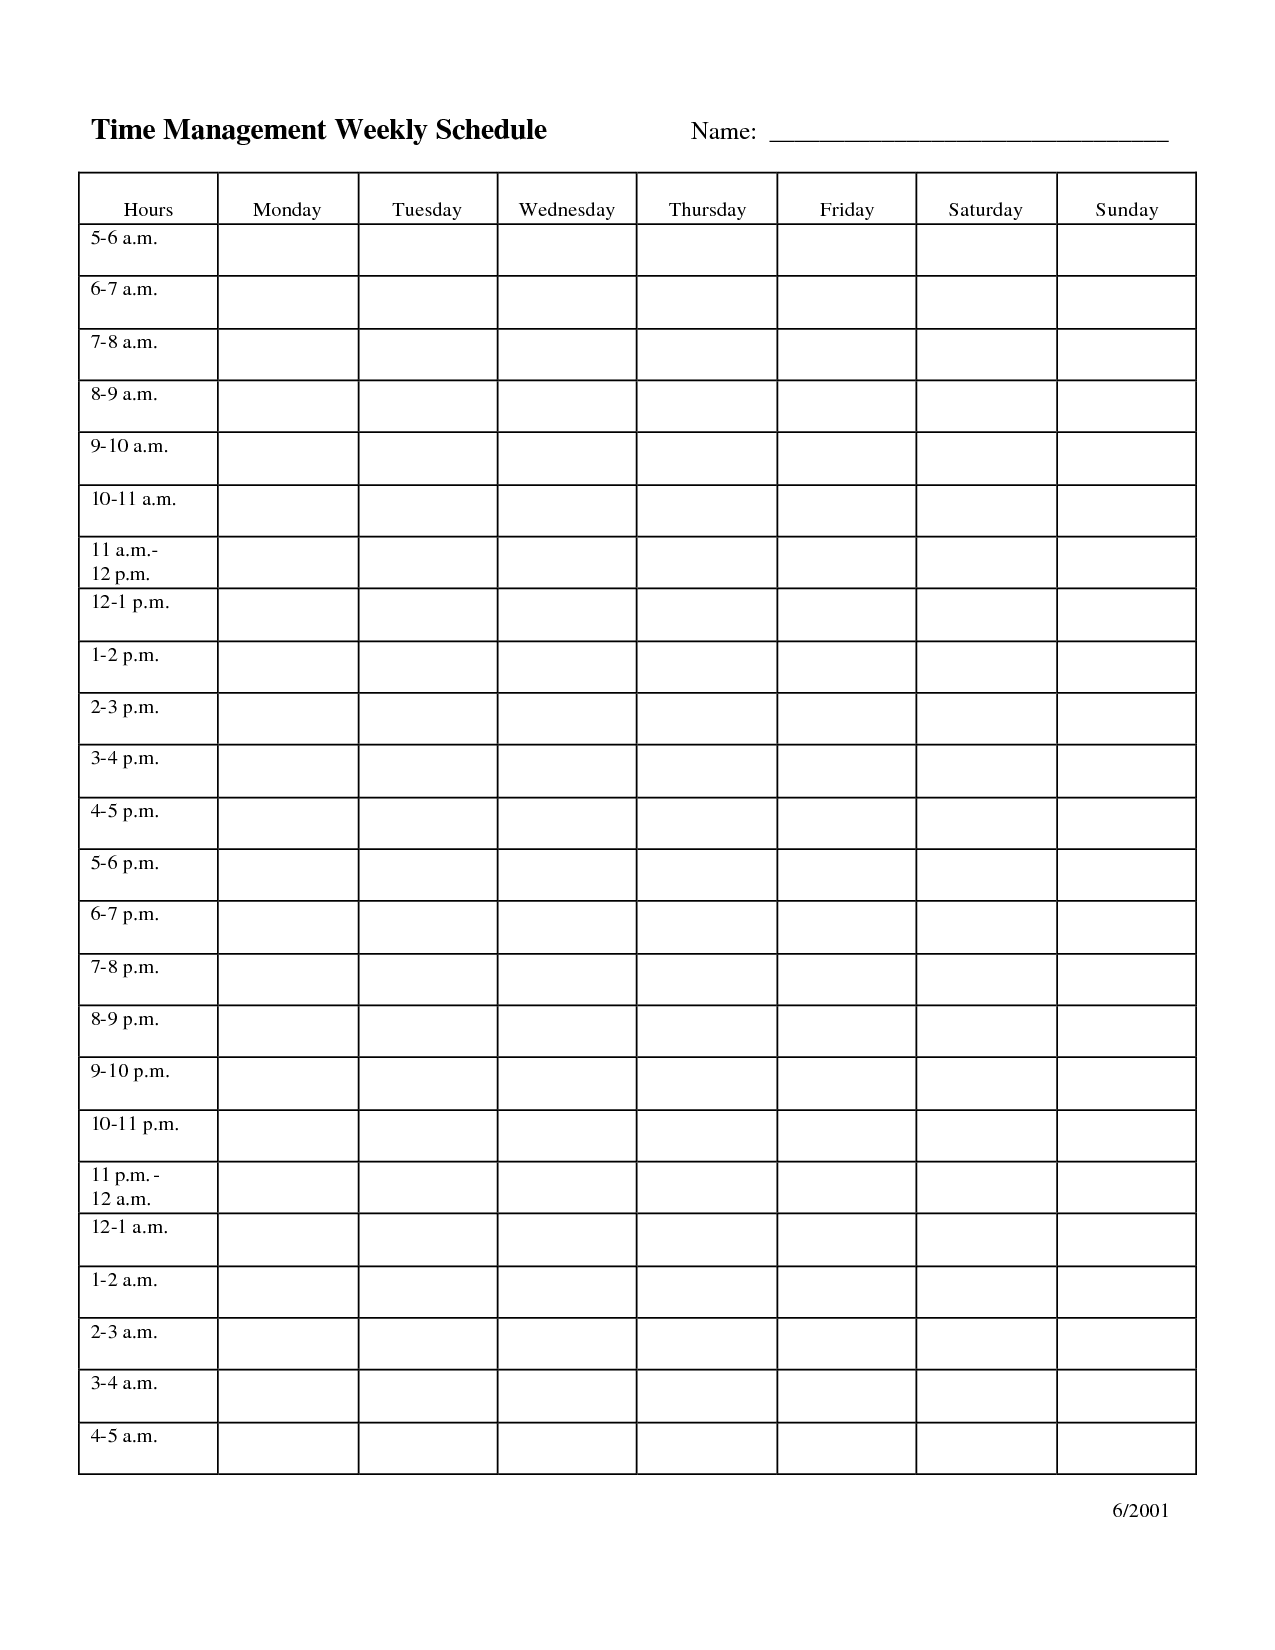 Time Management Weekly Schedule Template … | Bobbies …